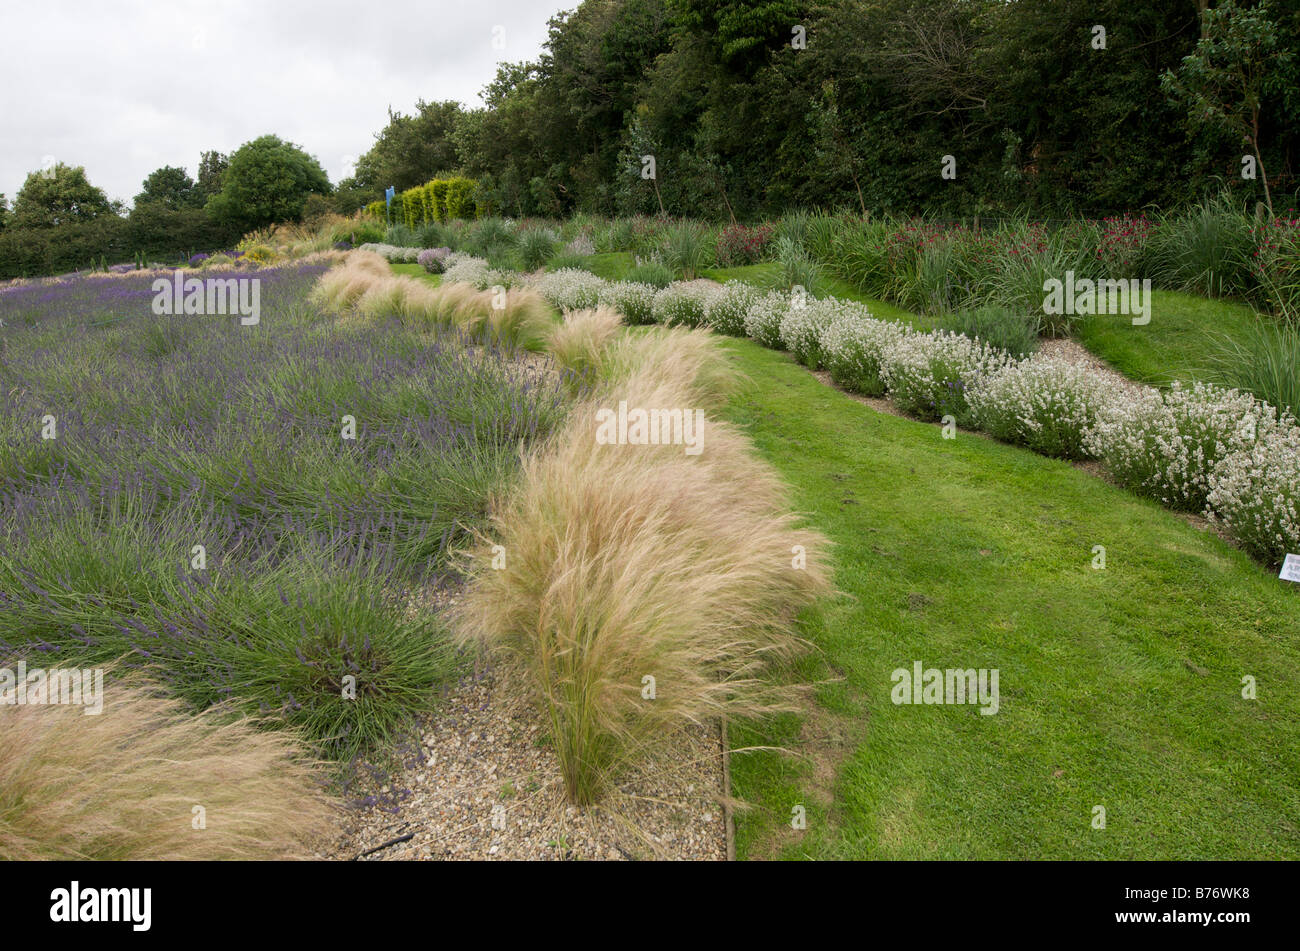 Angel hair grass with (stipa tenuissima) ,lined paths and ,lavender garden Stock Photo